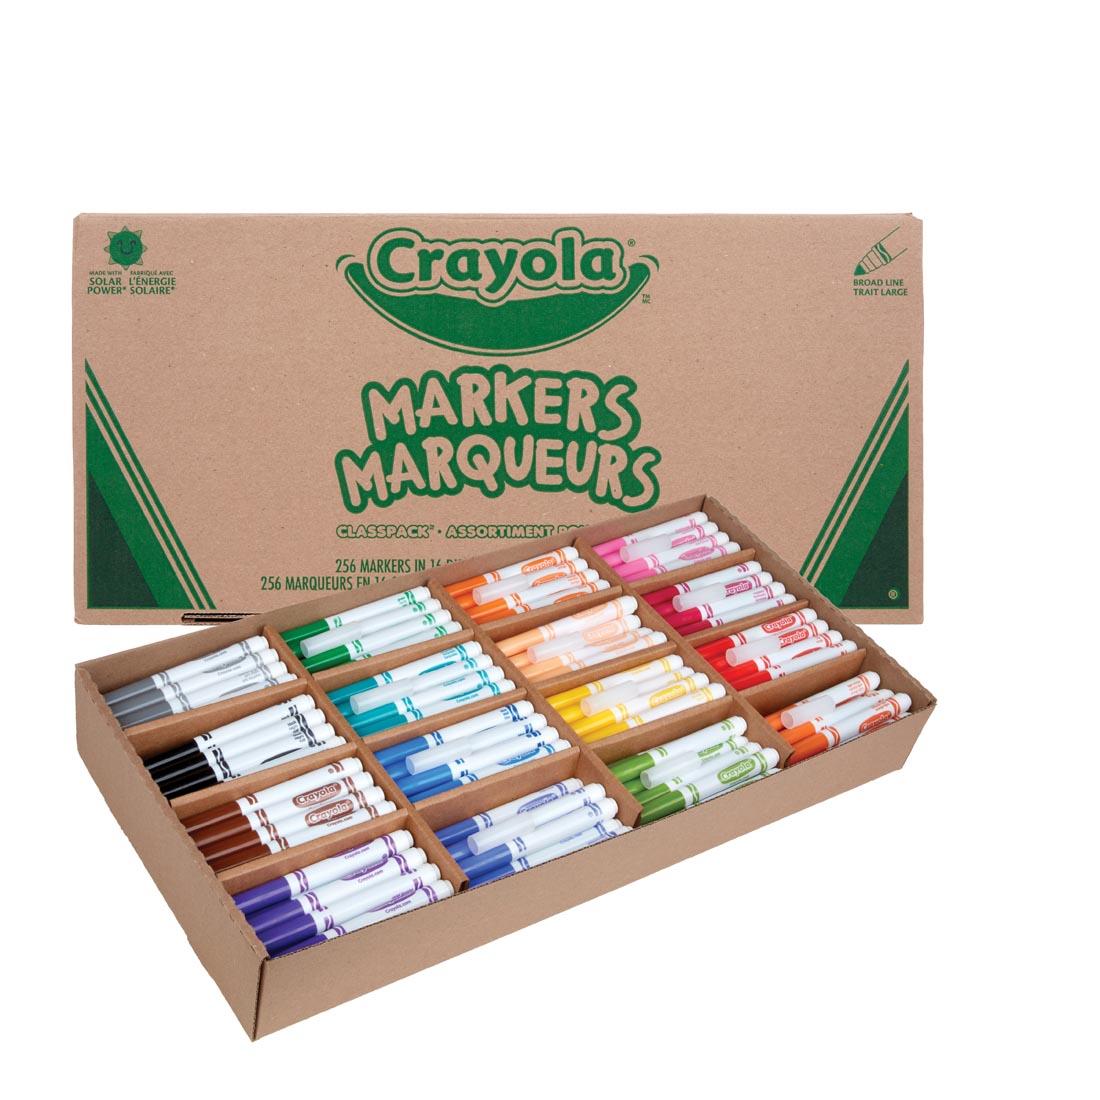 Crayola Broad Line Markers Classpack box shown both open and closed